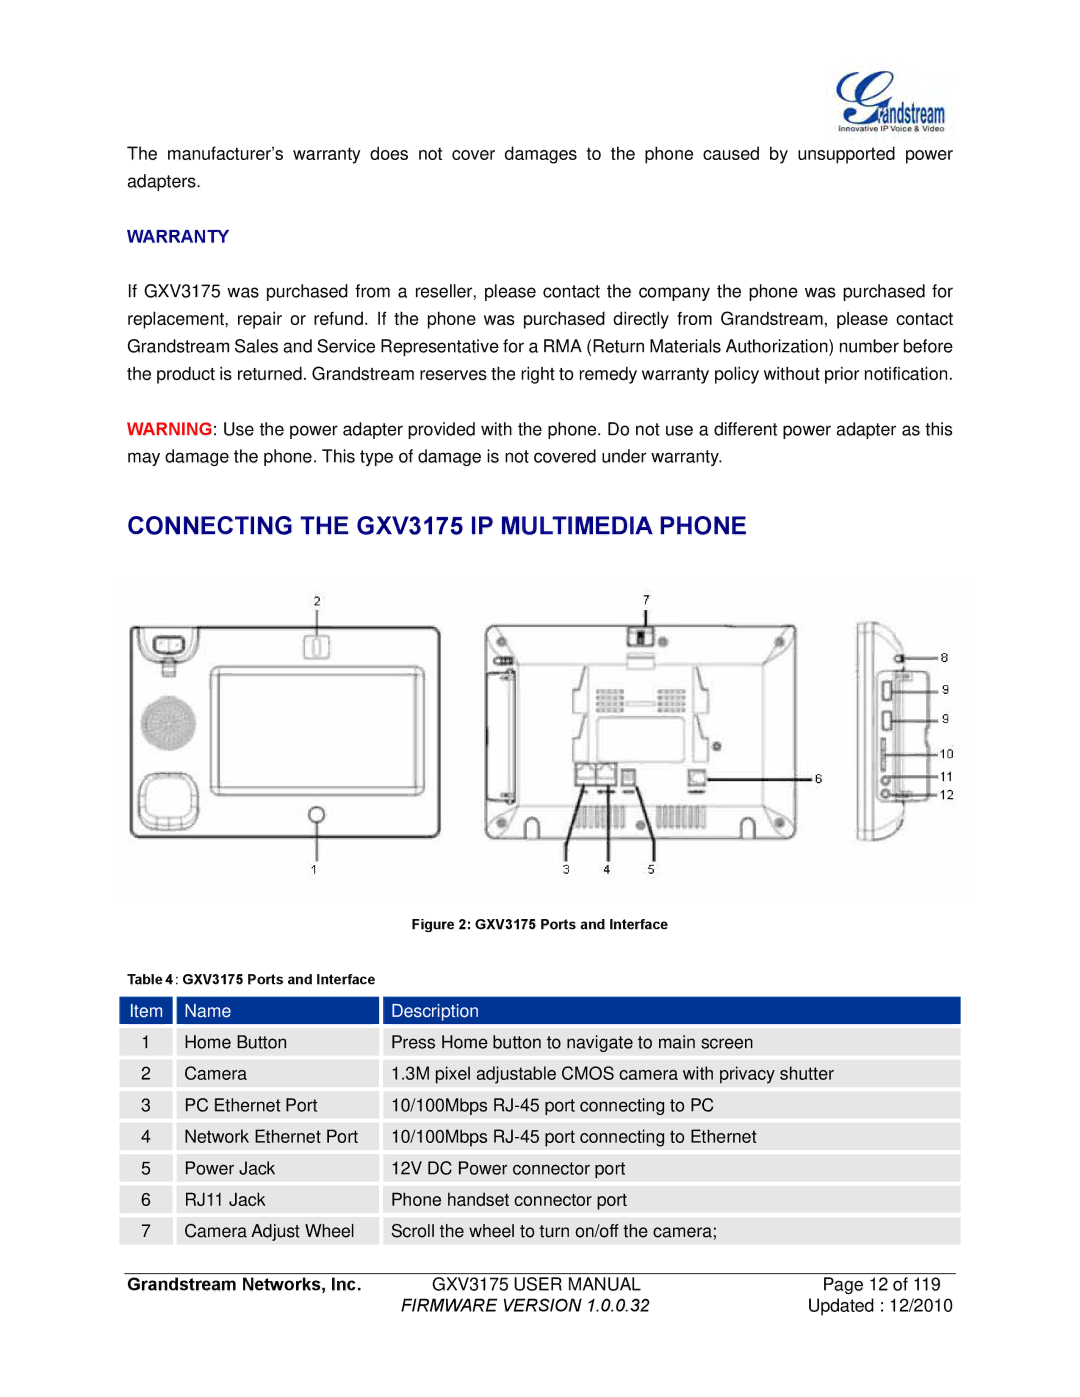 Grandstream Networks manual Connecting the GXV3175 IP Multimedia Phone, Warranty 